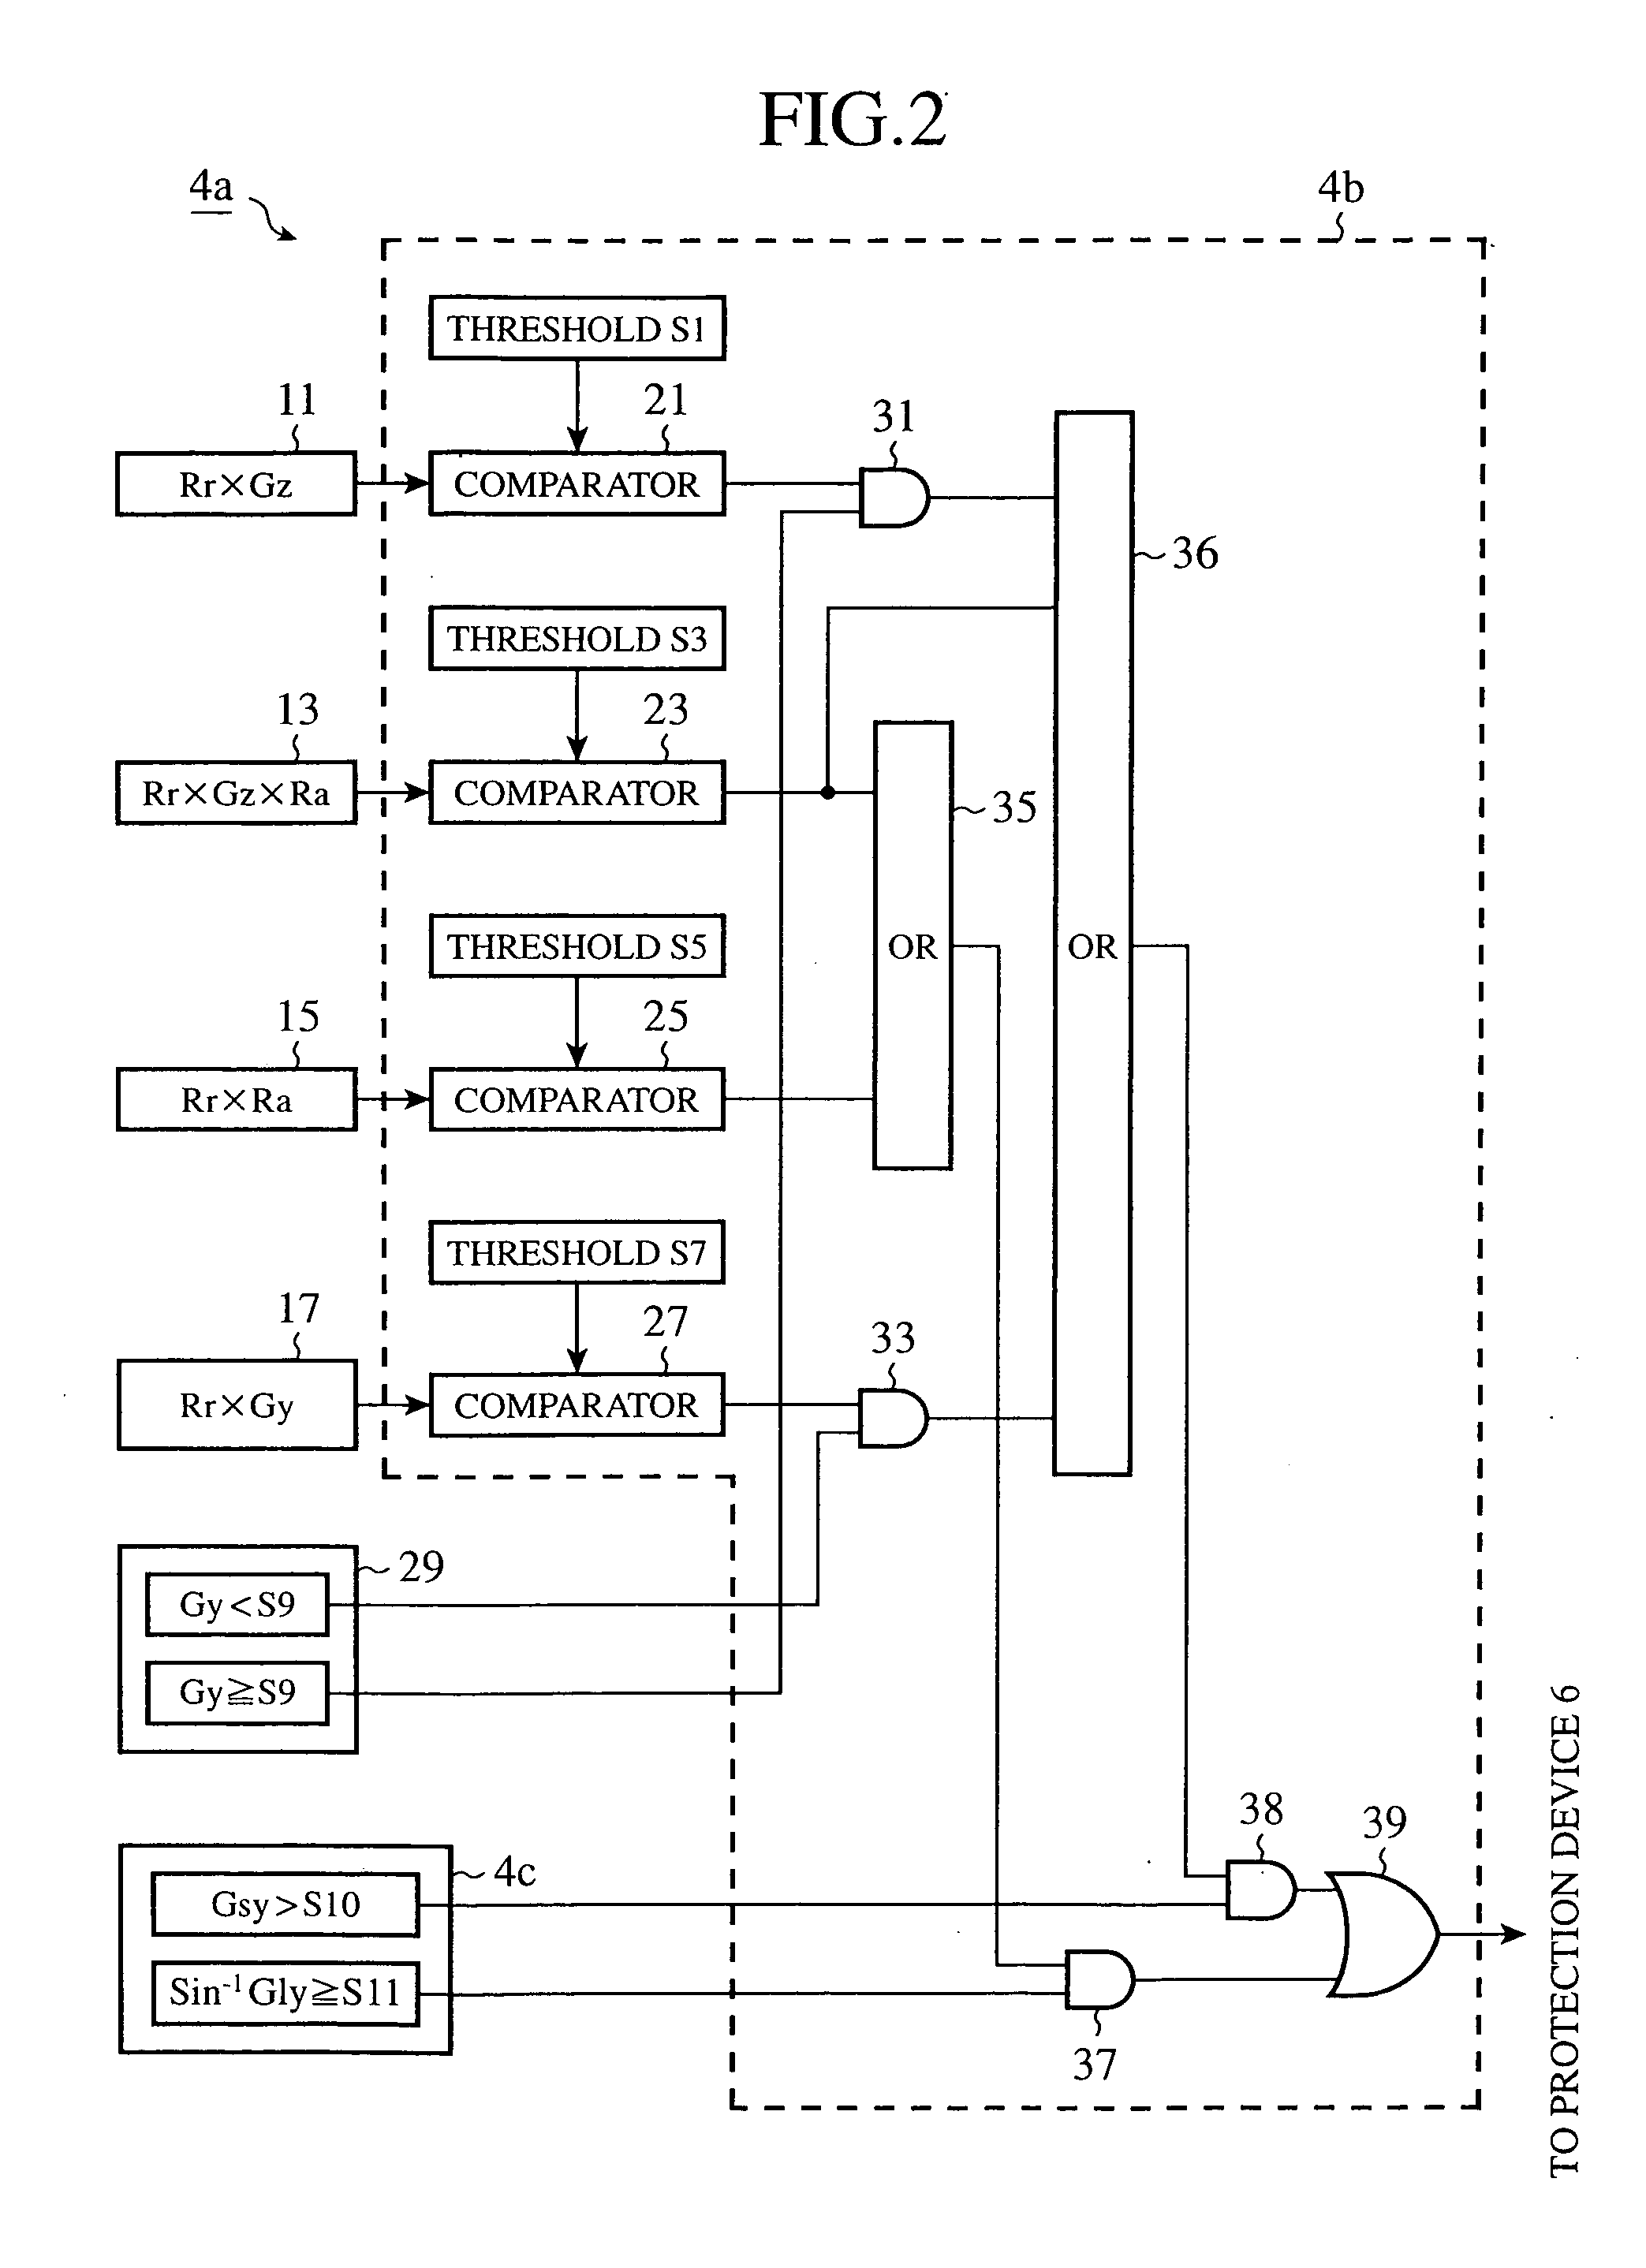 Rollover determination apparatus for vehicles